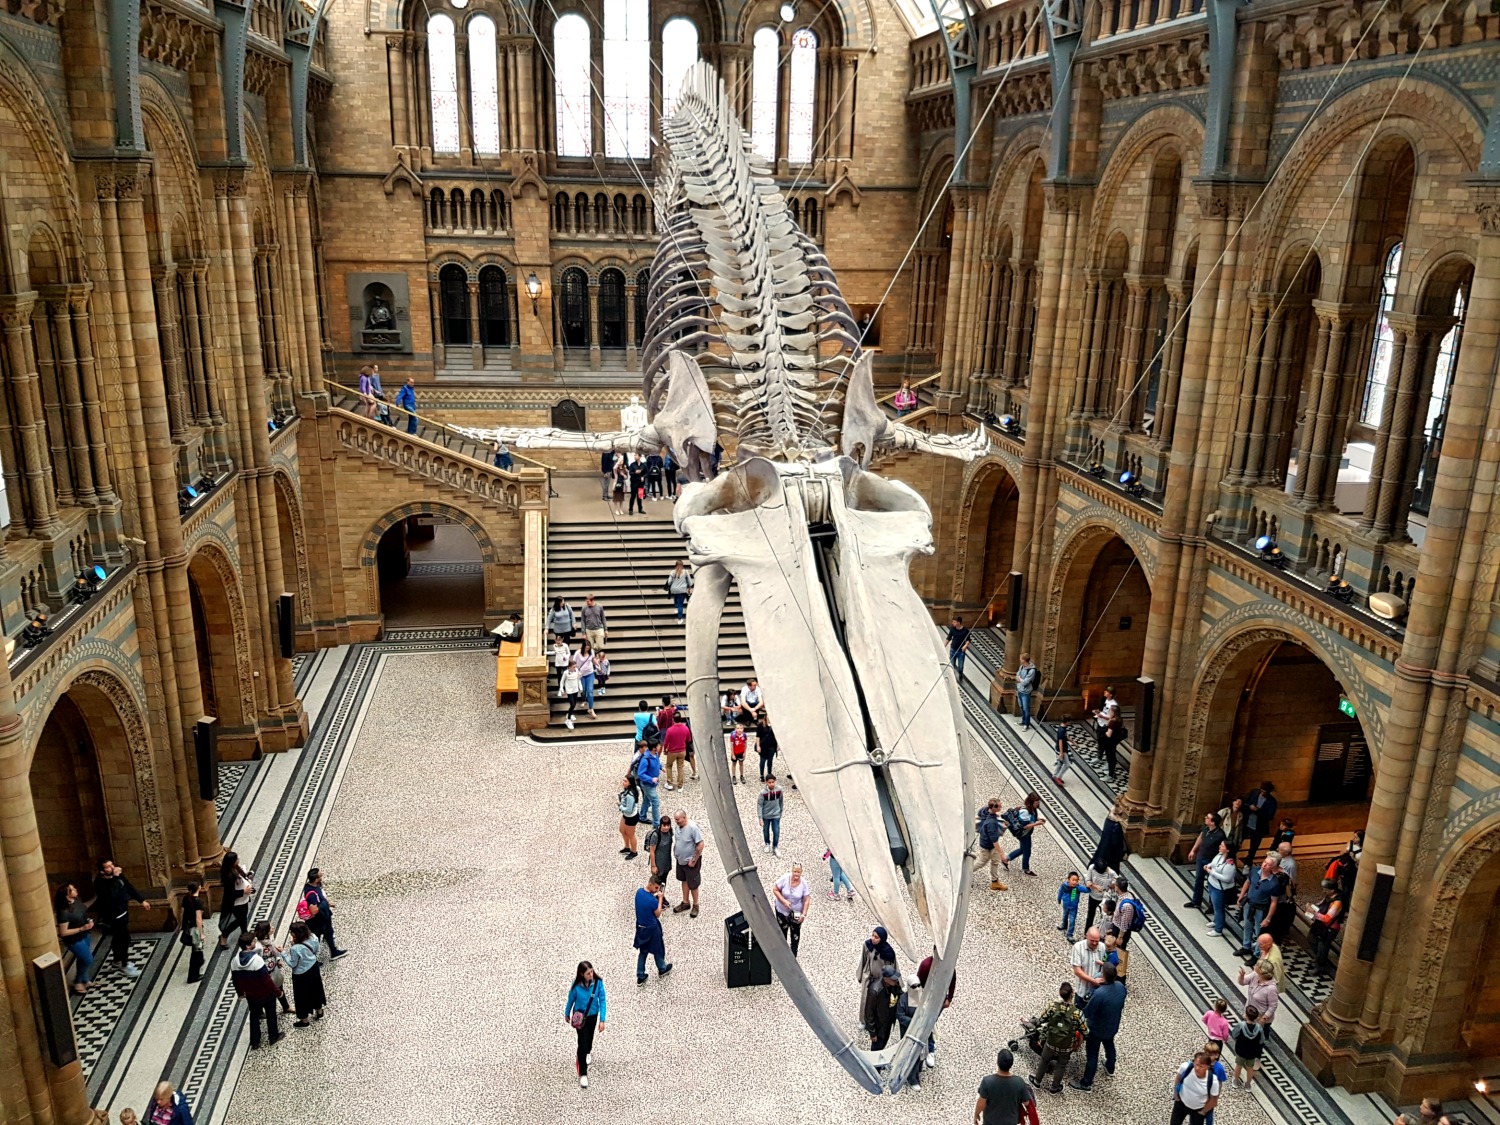 The whale skeleton which replaced Dippy the diplodocus in the Hintze Hall of London's natural history museum - one of the best free things to do with kids in London